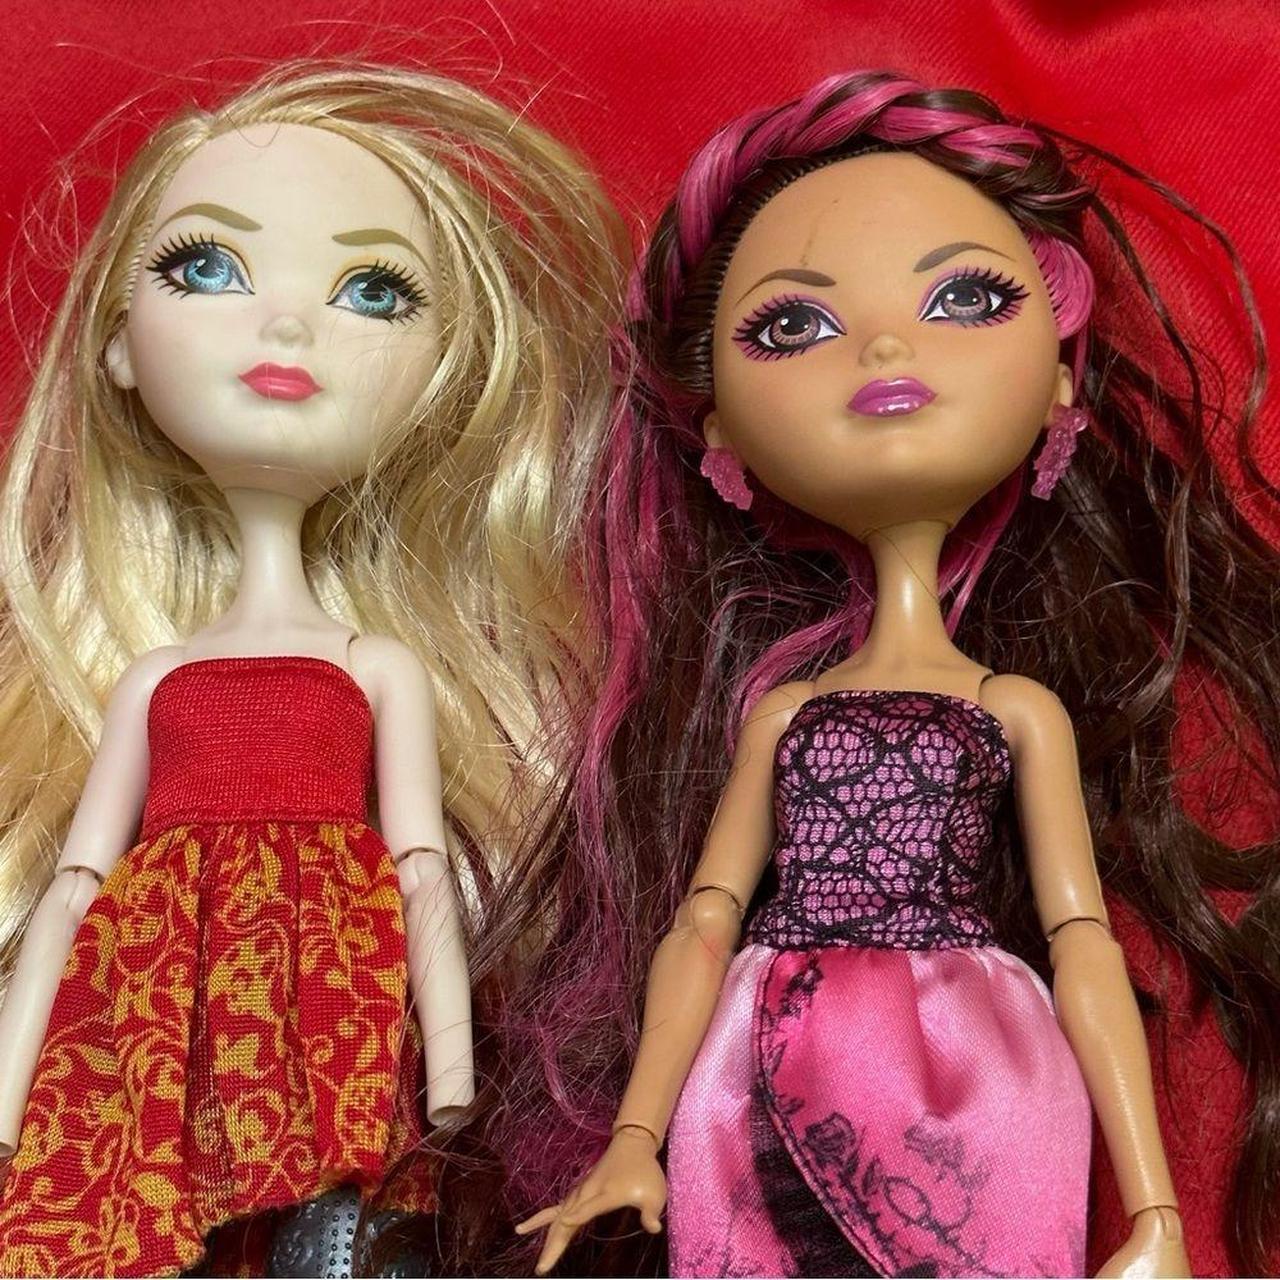 Getting Fairest Apple White Doll, Ever After High